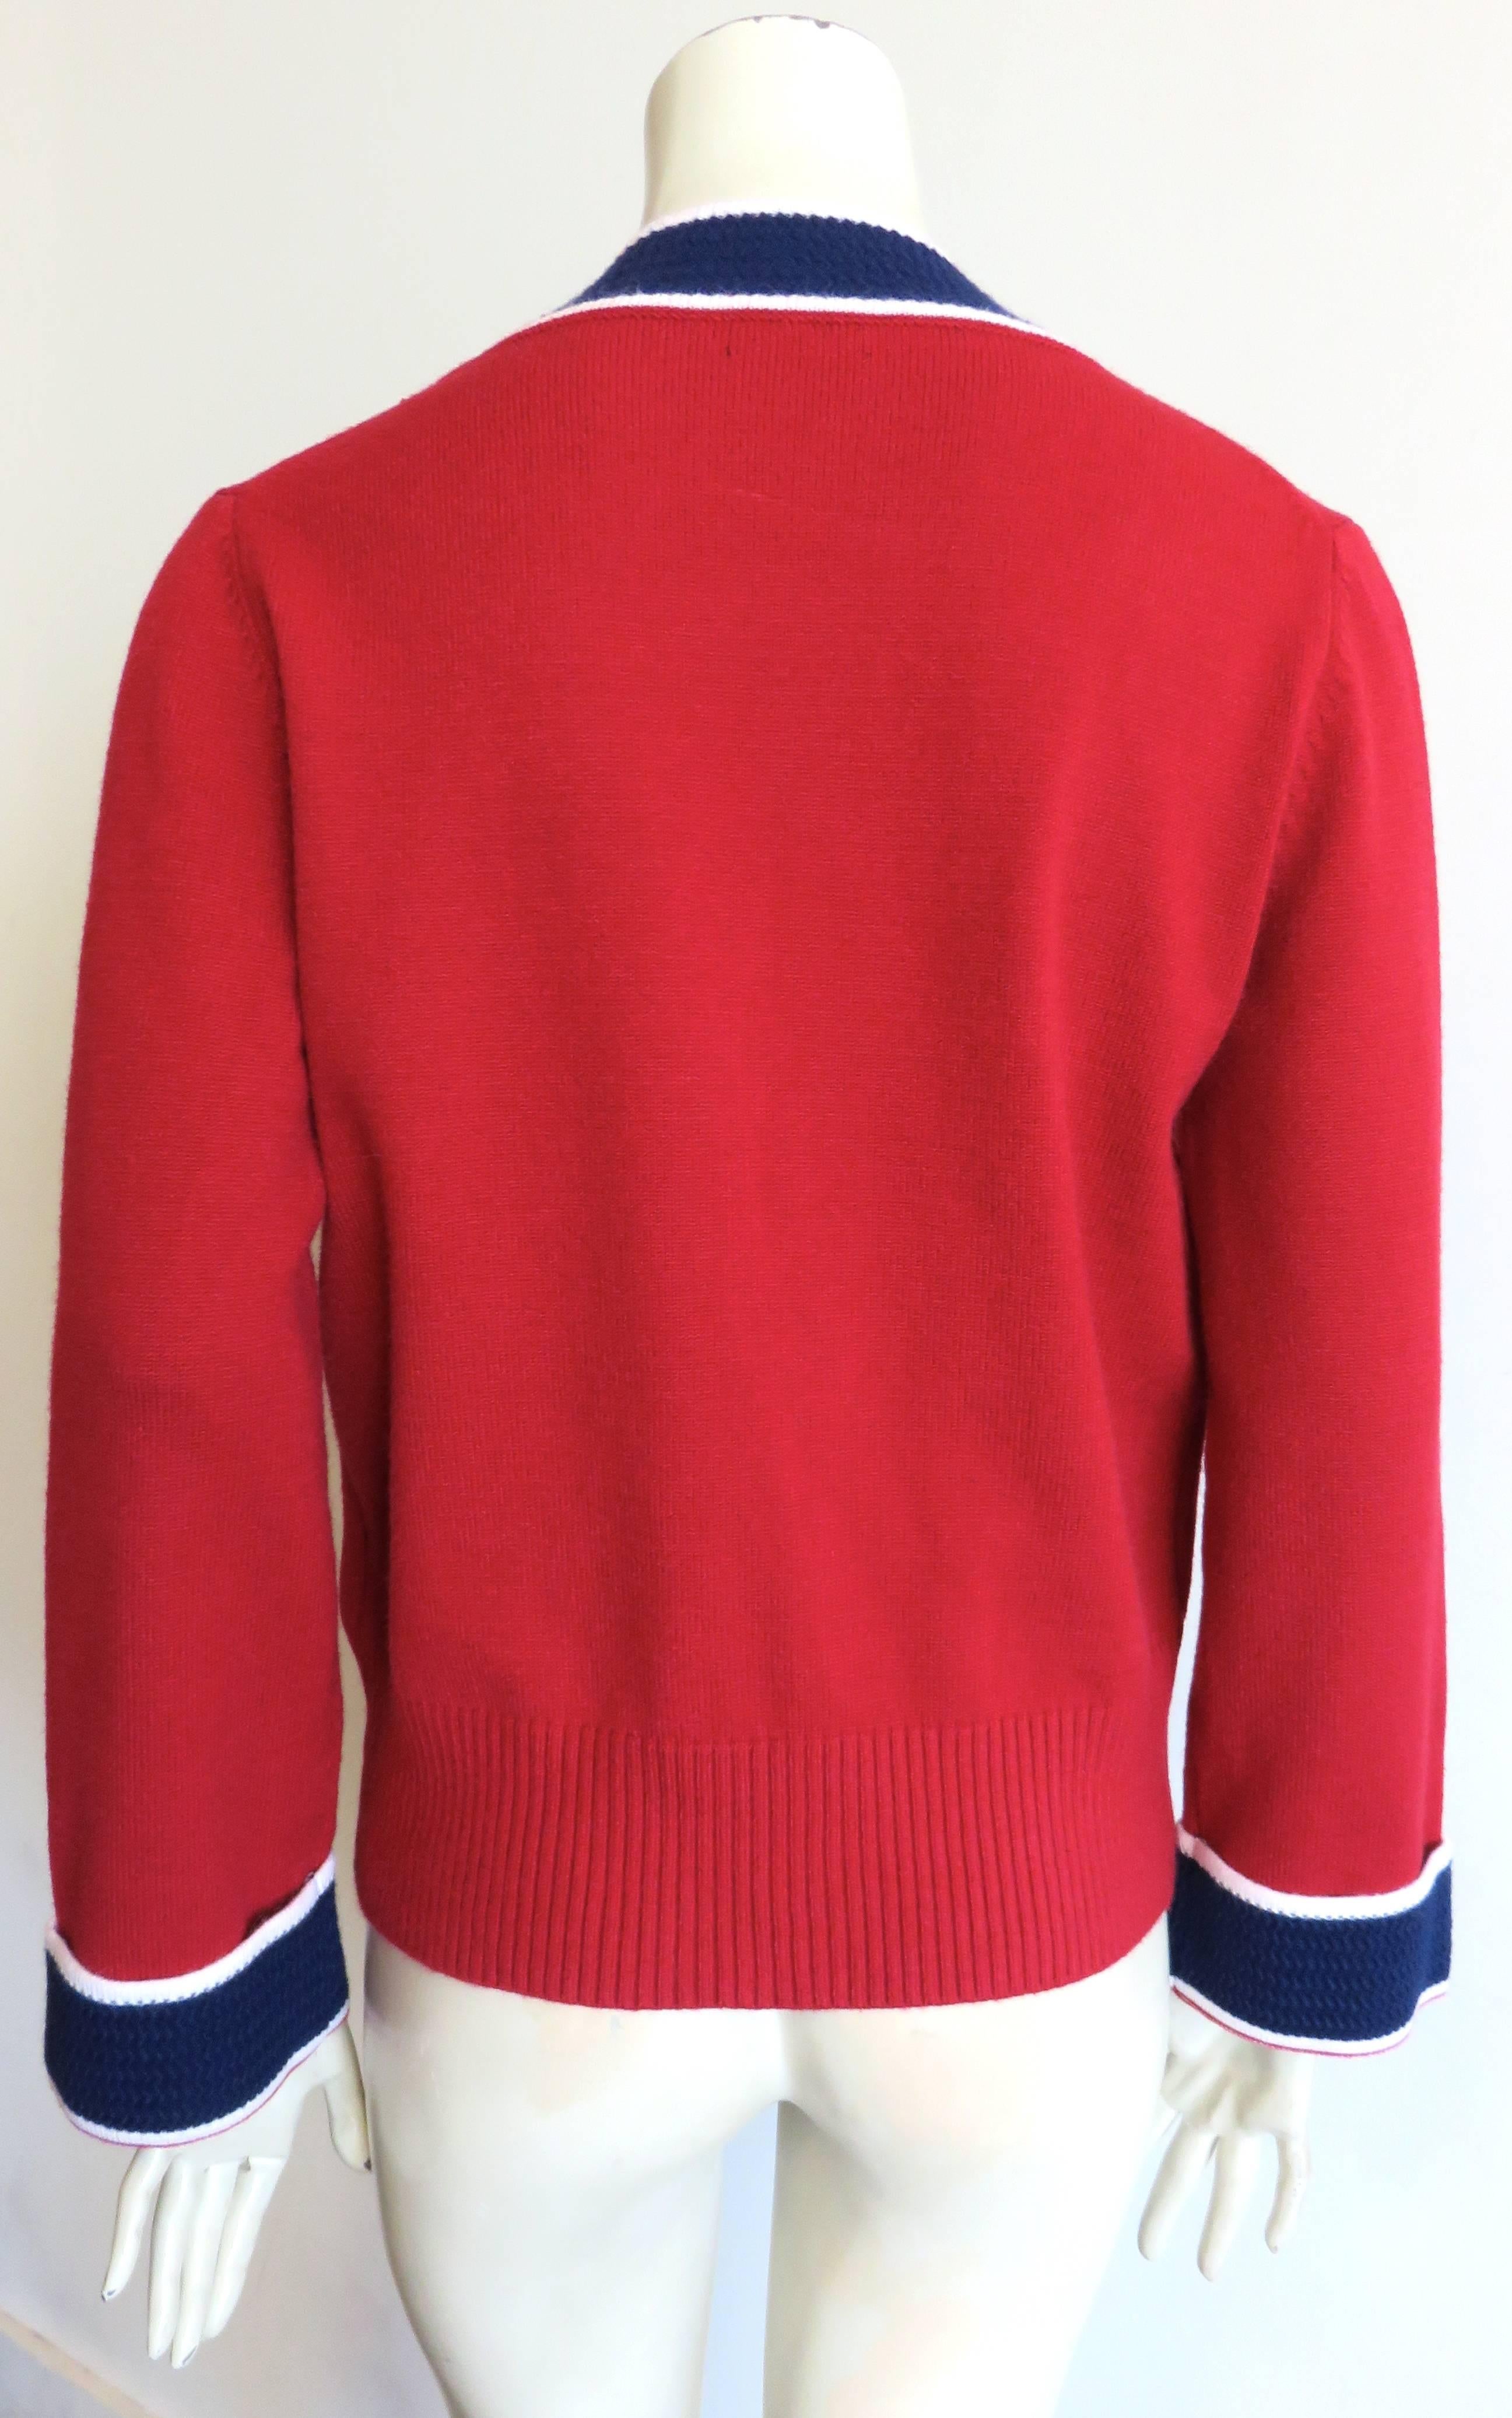 Red CHANEL PARIS Pure cashmere cardigan sweater - worn once For Sale